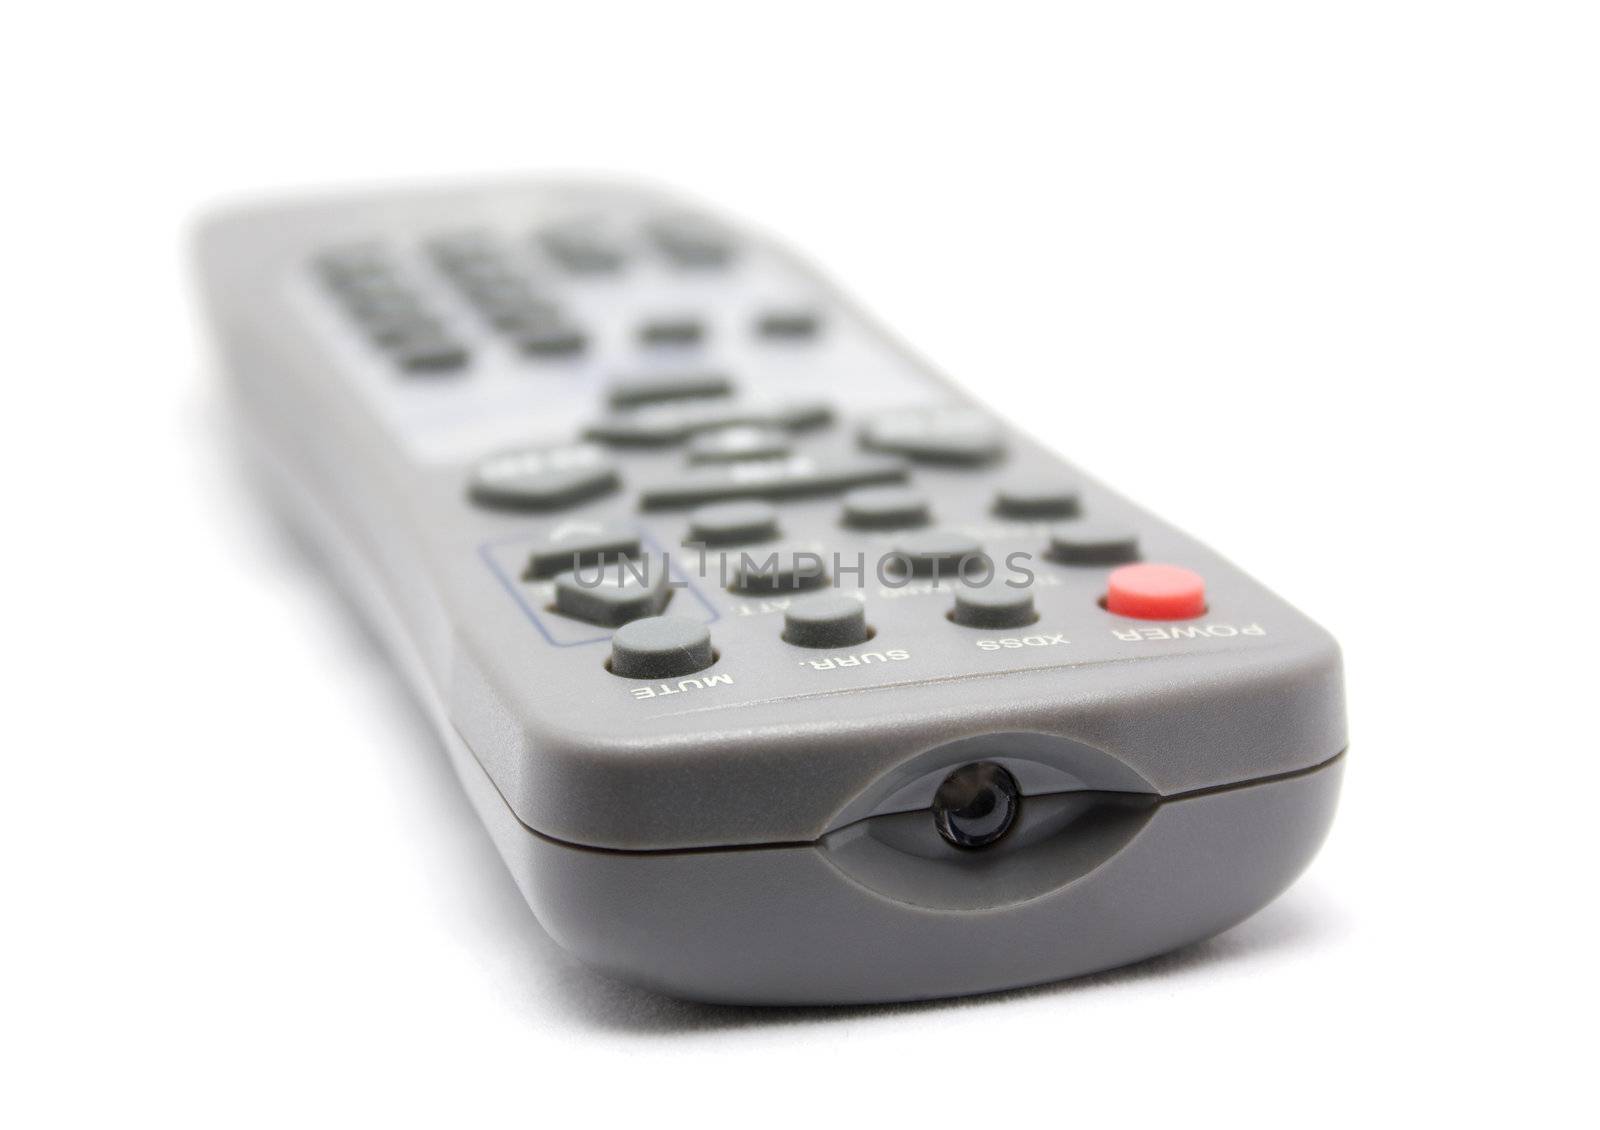 TV remote control isolated on white background. Selective focus limited to front objects.